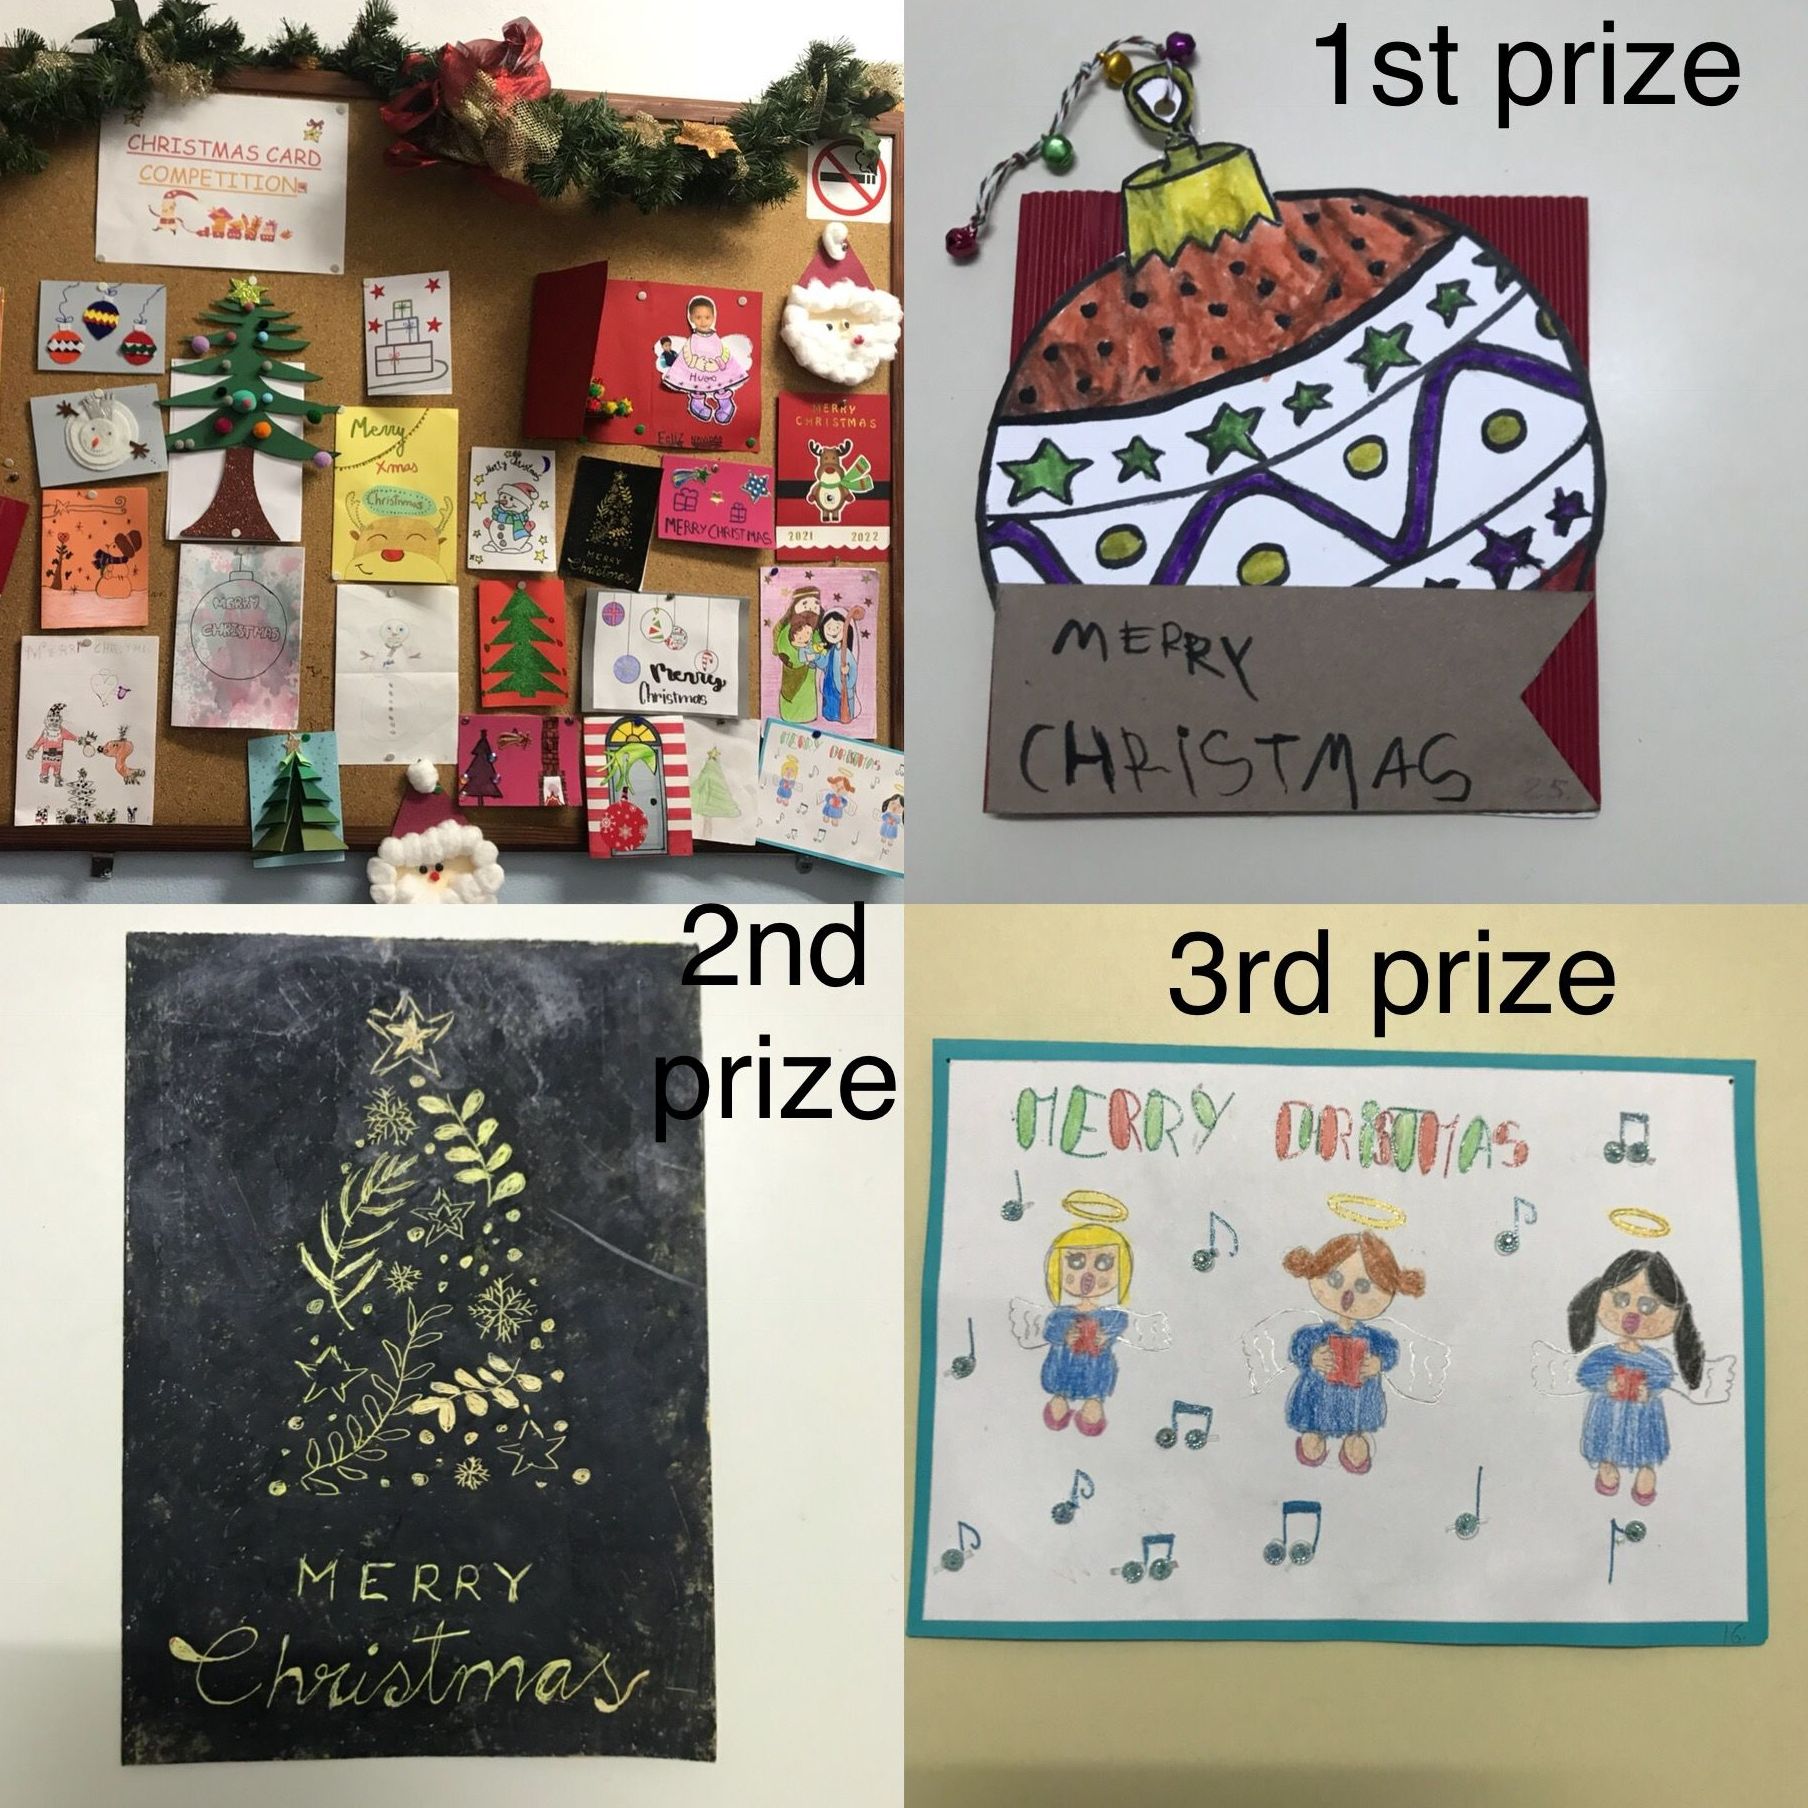 And the winners of the 2021 Christmas Card Competition are...